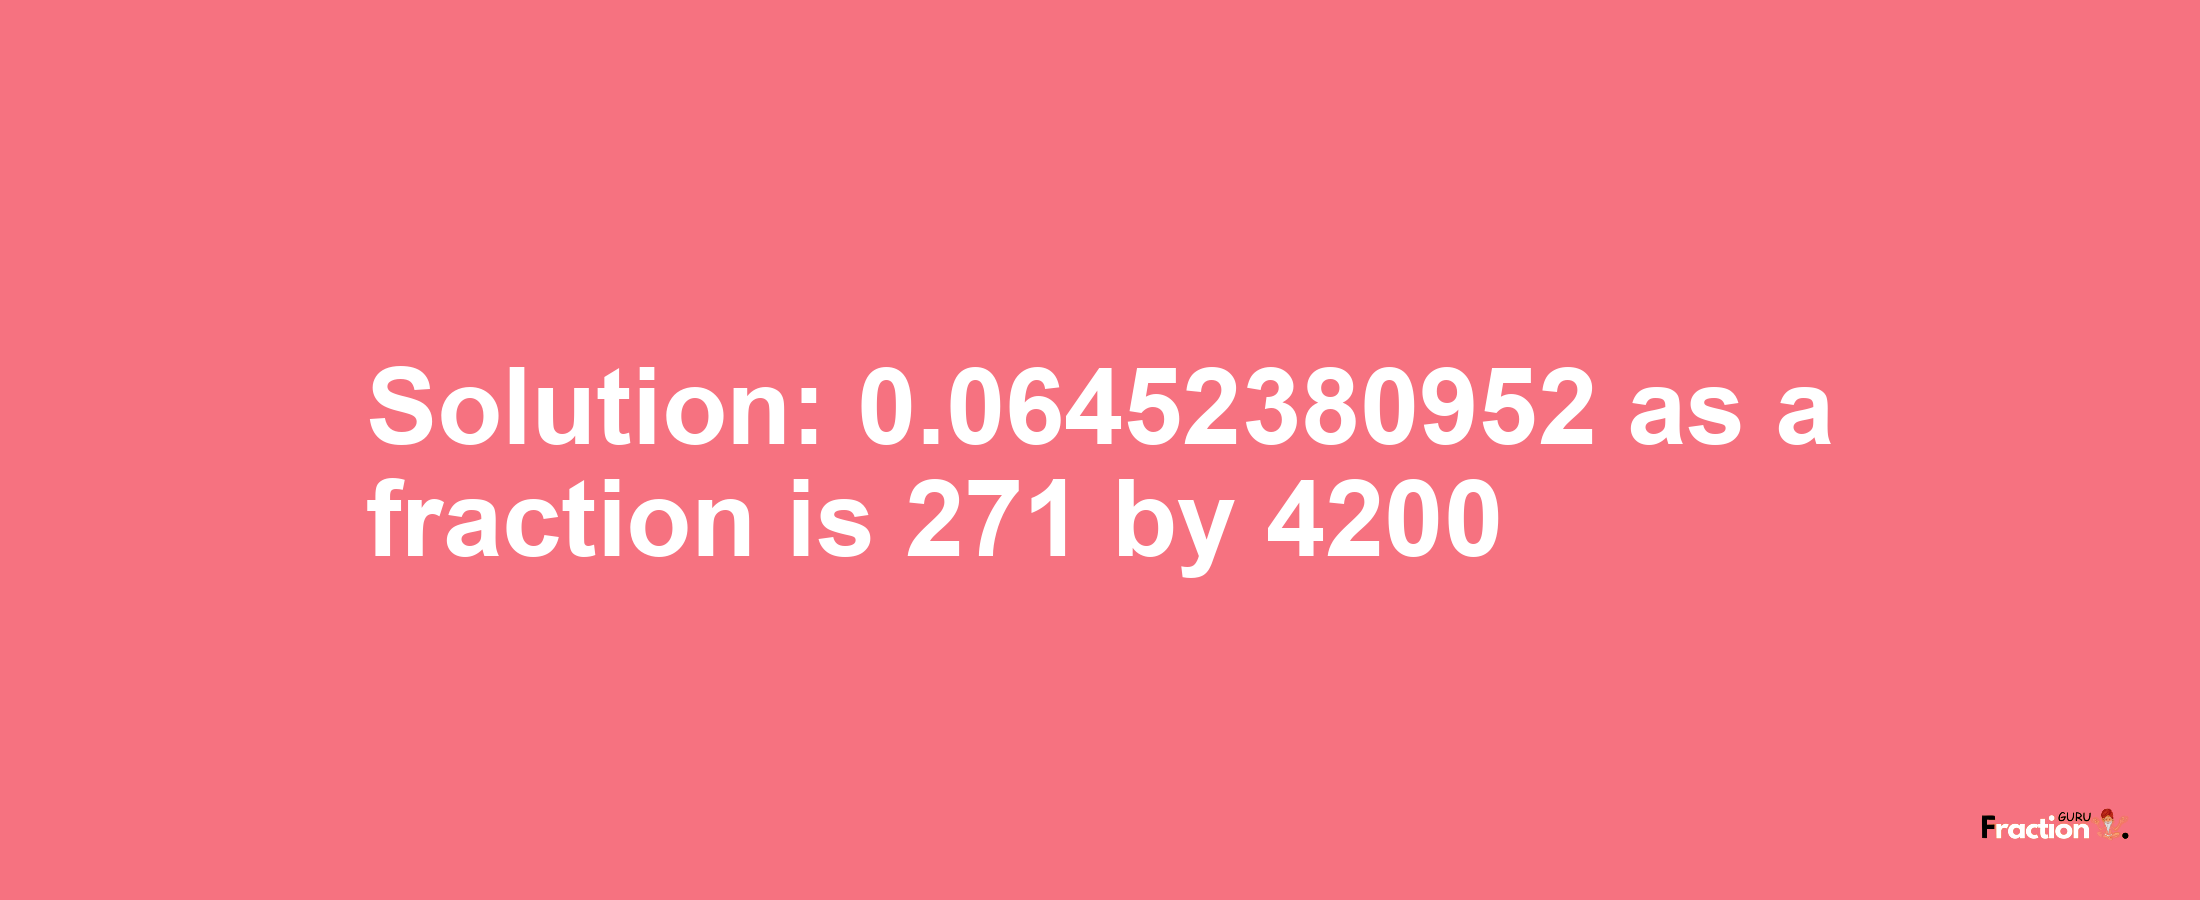 Solution:0.06452380952 as a fraction is 271/4200